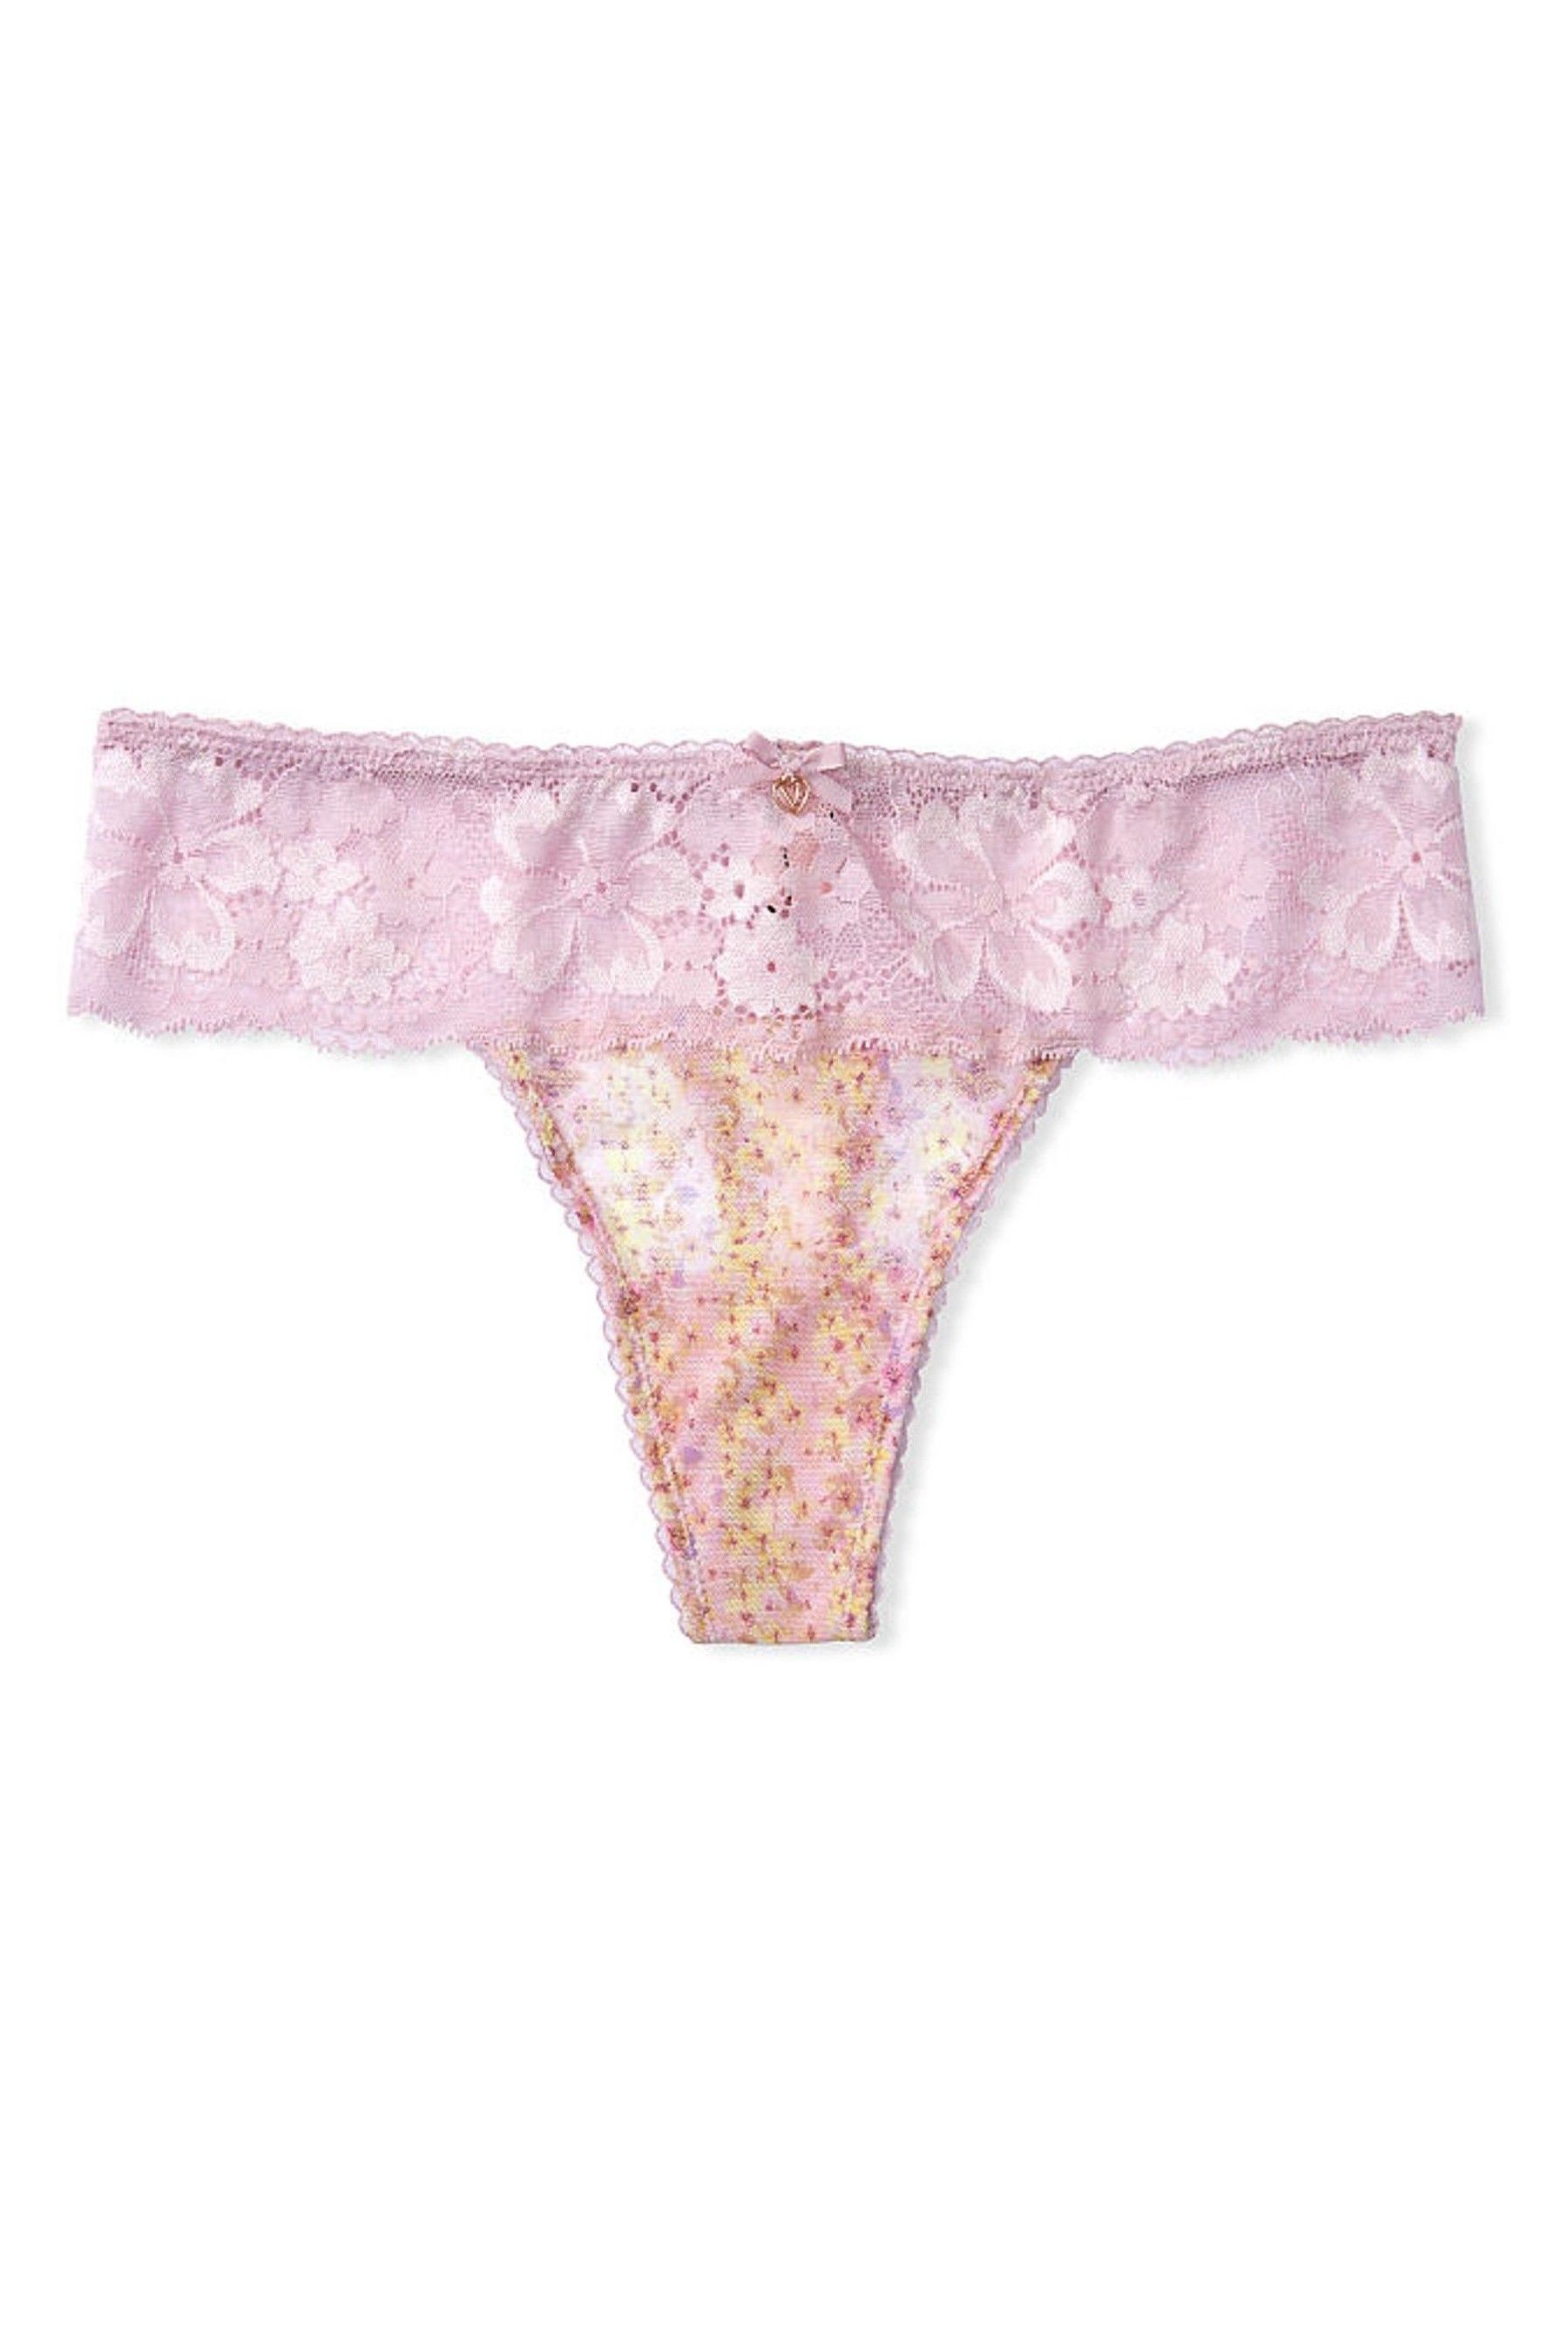 Buy Victoria's Secret Lace Mesh Thong Panty from the Victoria's Secret ...